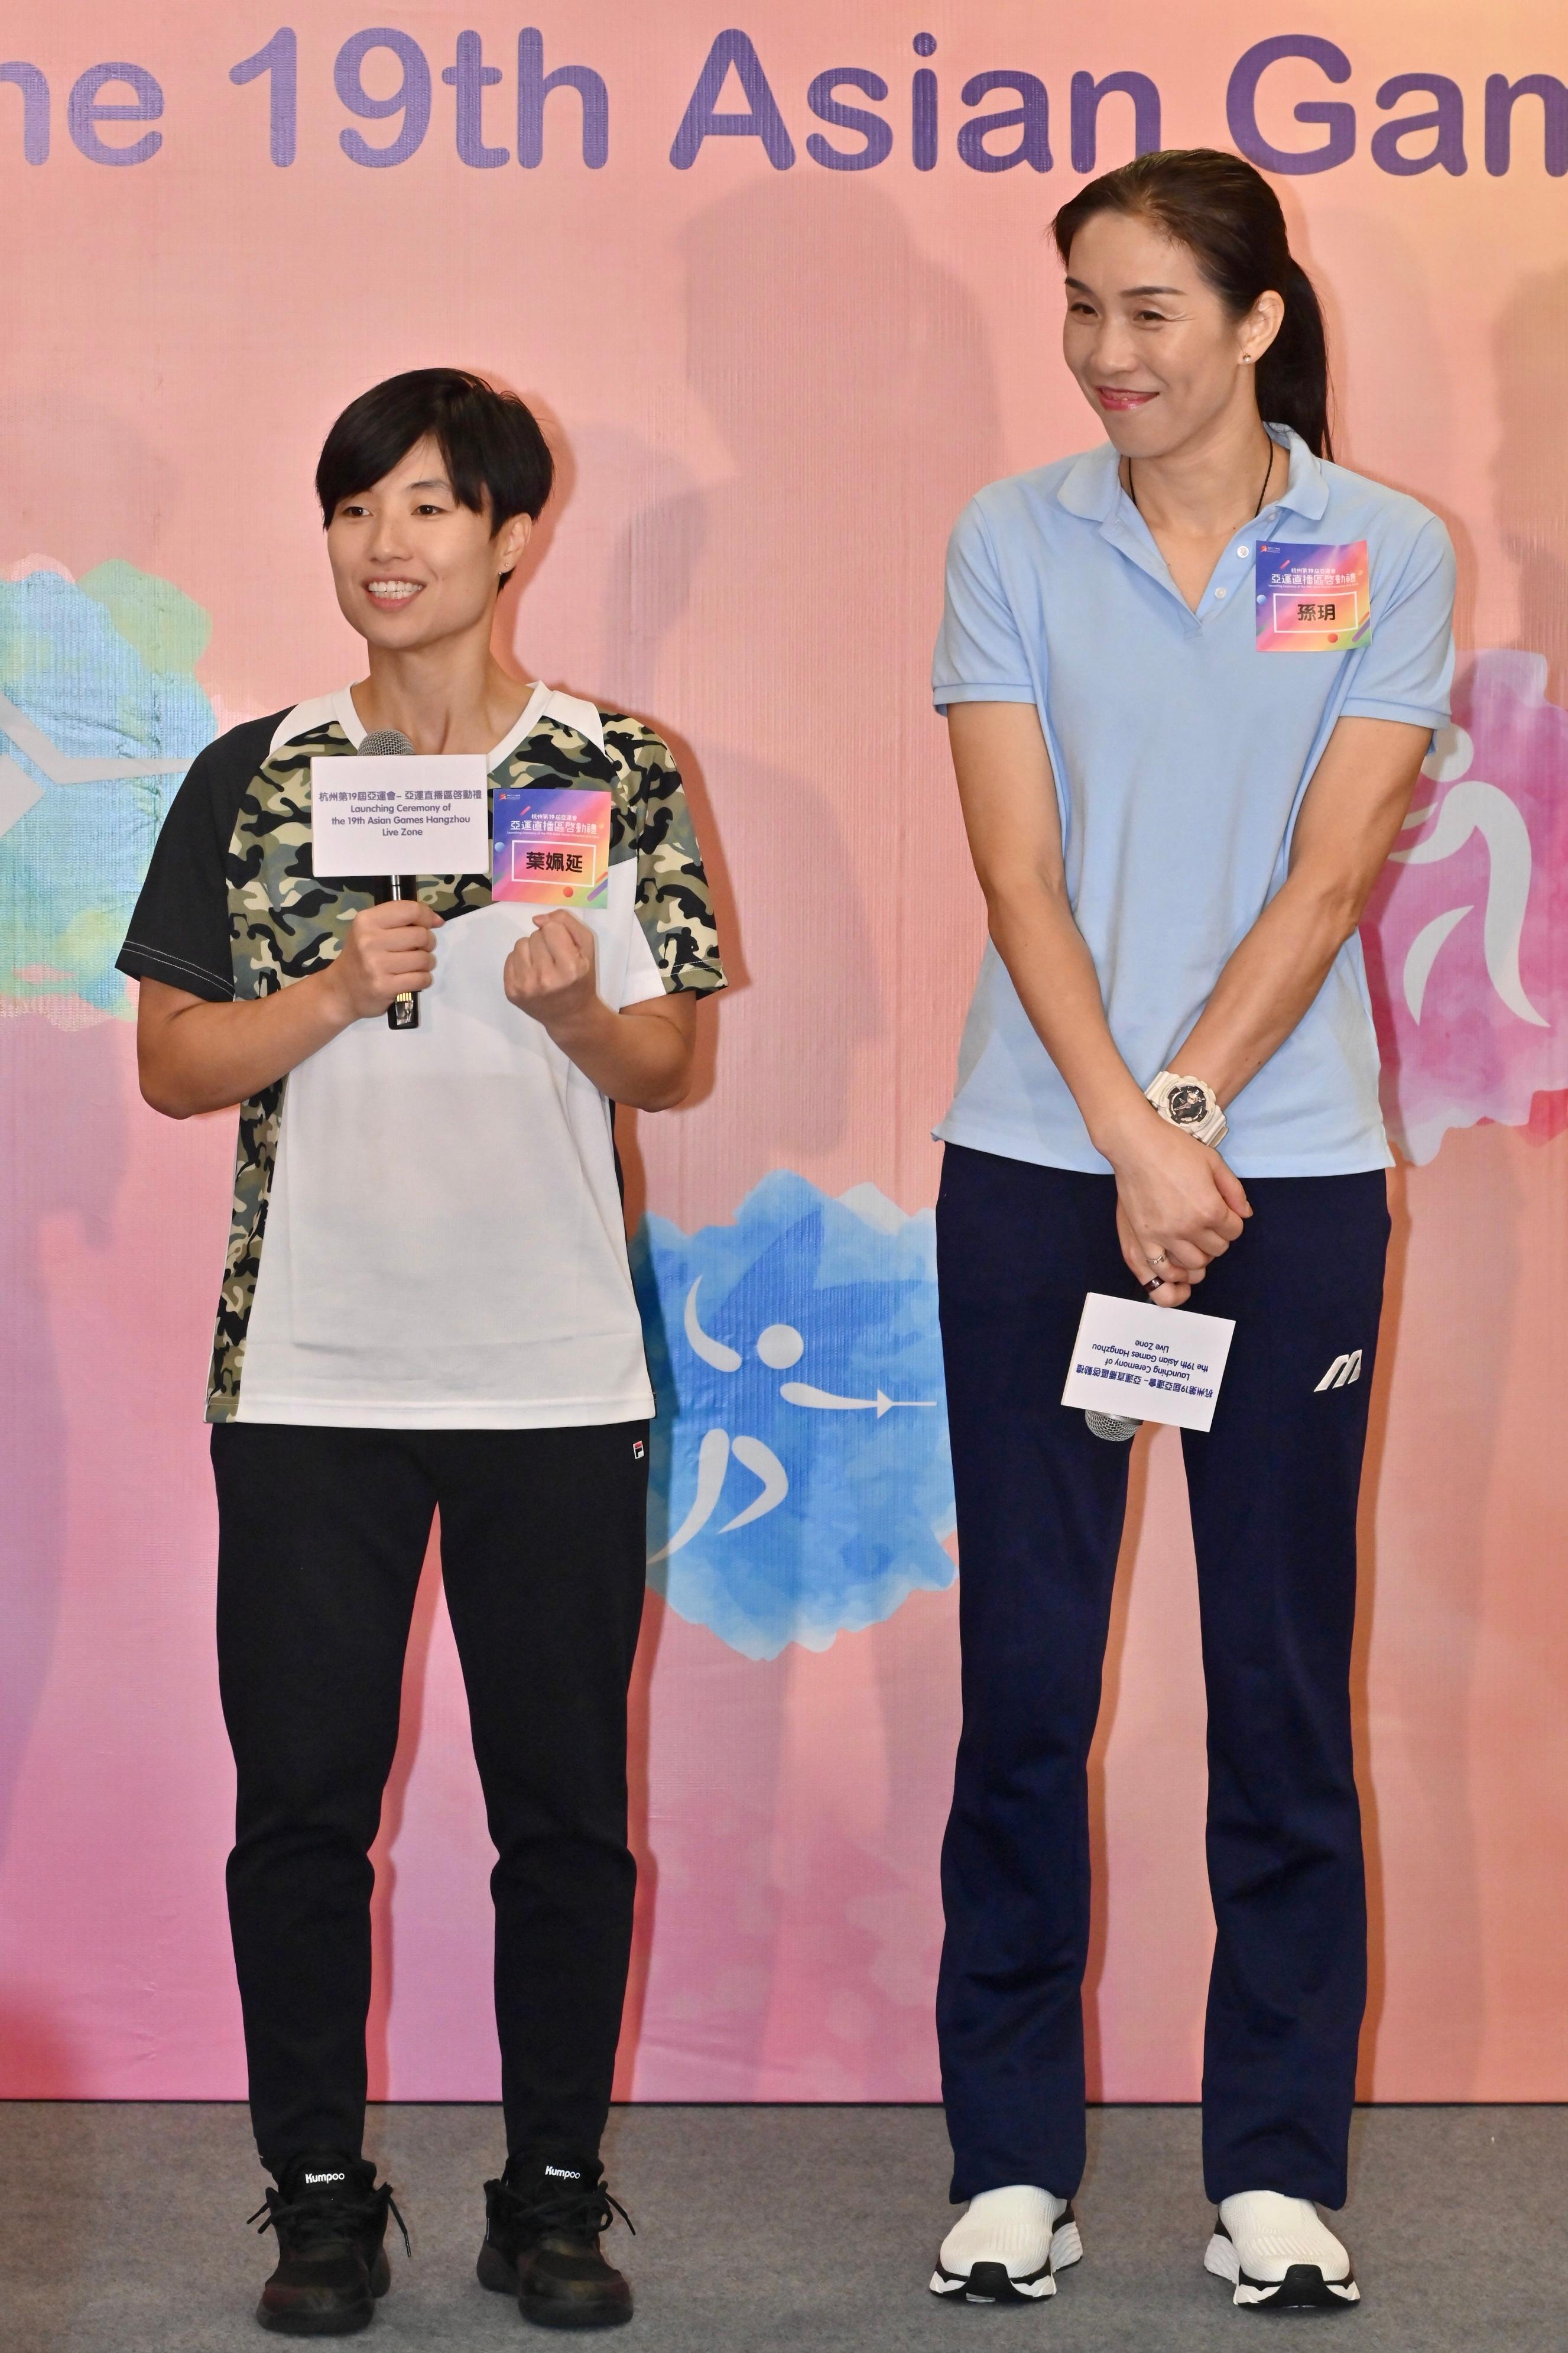 The Leisure and Cultural Services Department held the "Launching Ceremony of the 19th Asian Games Hangzhou Live Zone" at the Secondary Hall of the Kowloon Park Sports Centre today (September 23). Photo shows Hong Kong badminton athlete Yip Pui-yin (left) speaking at the sharing session.